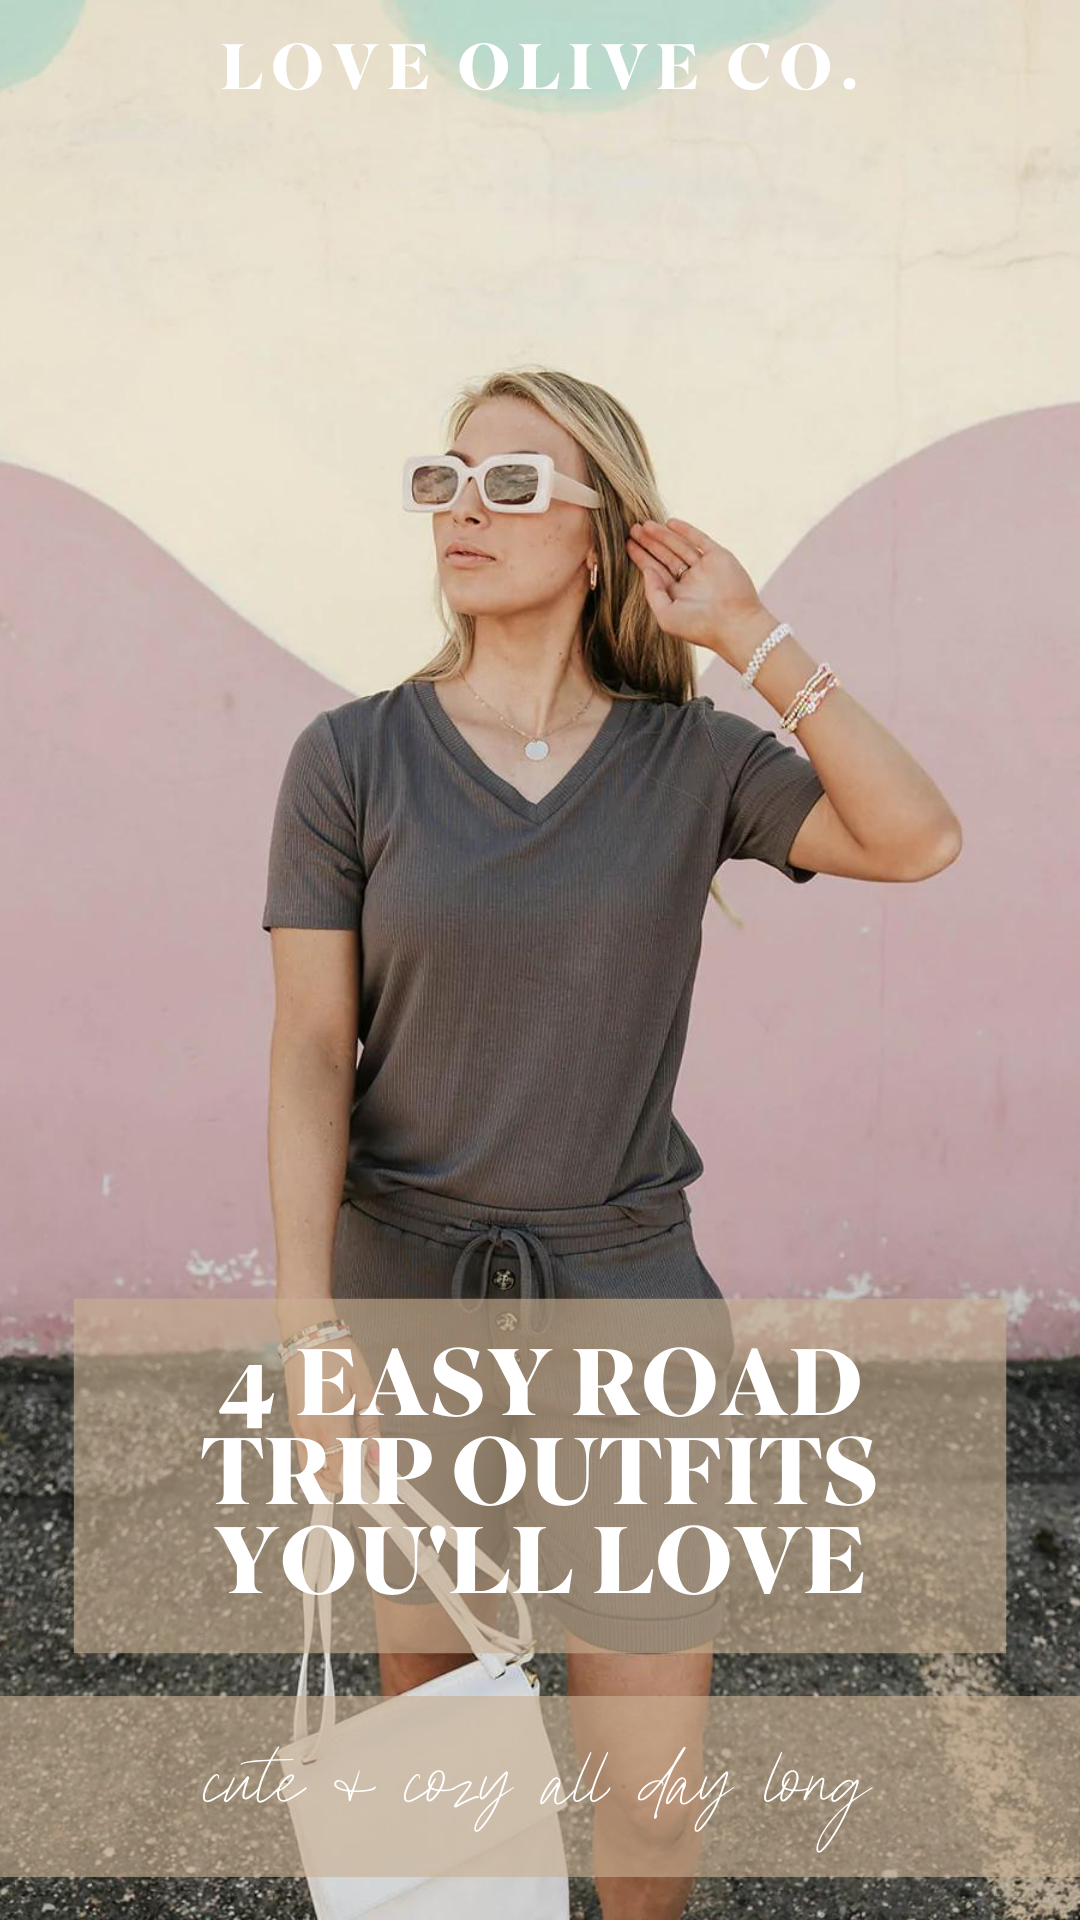 4 easy road trip outfits you'll love. www.loveoliveco.com